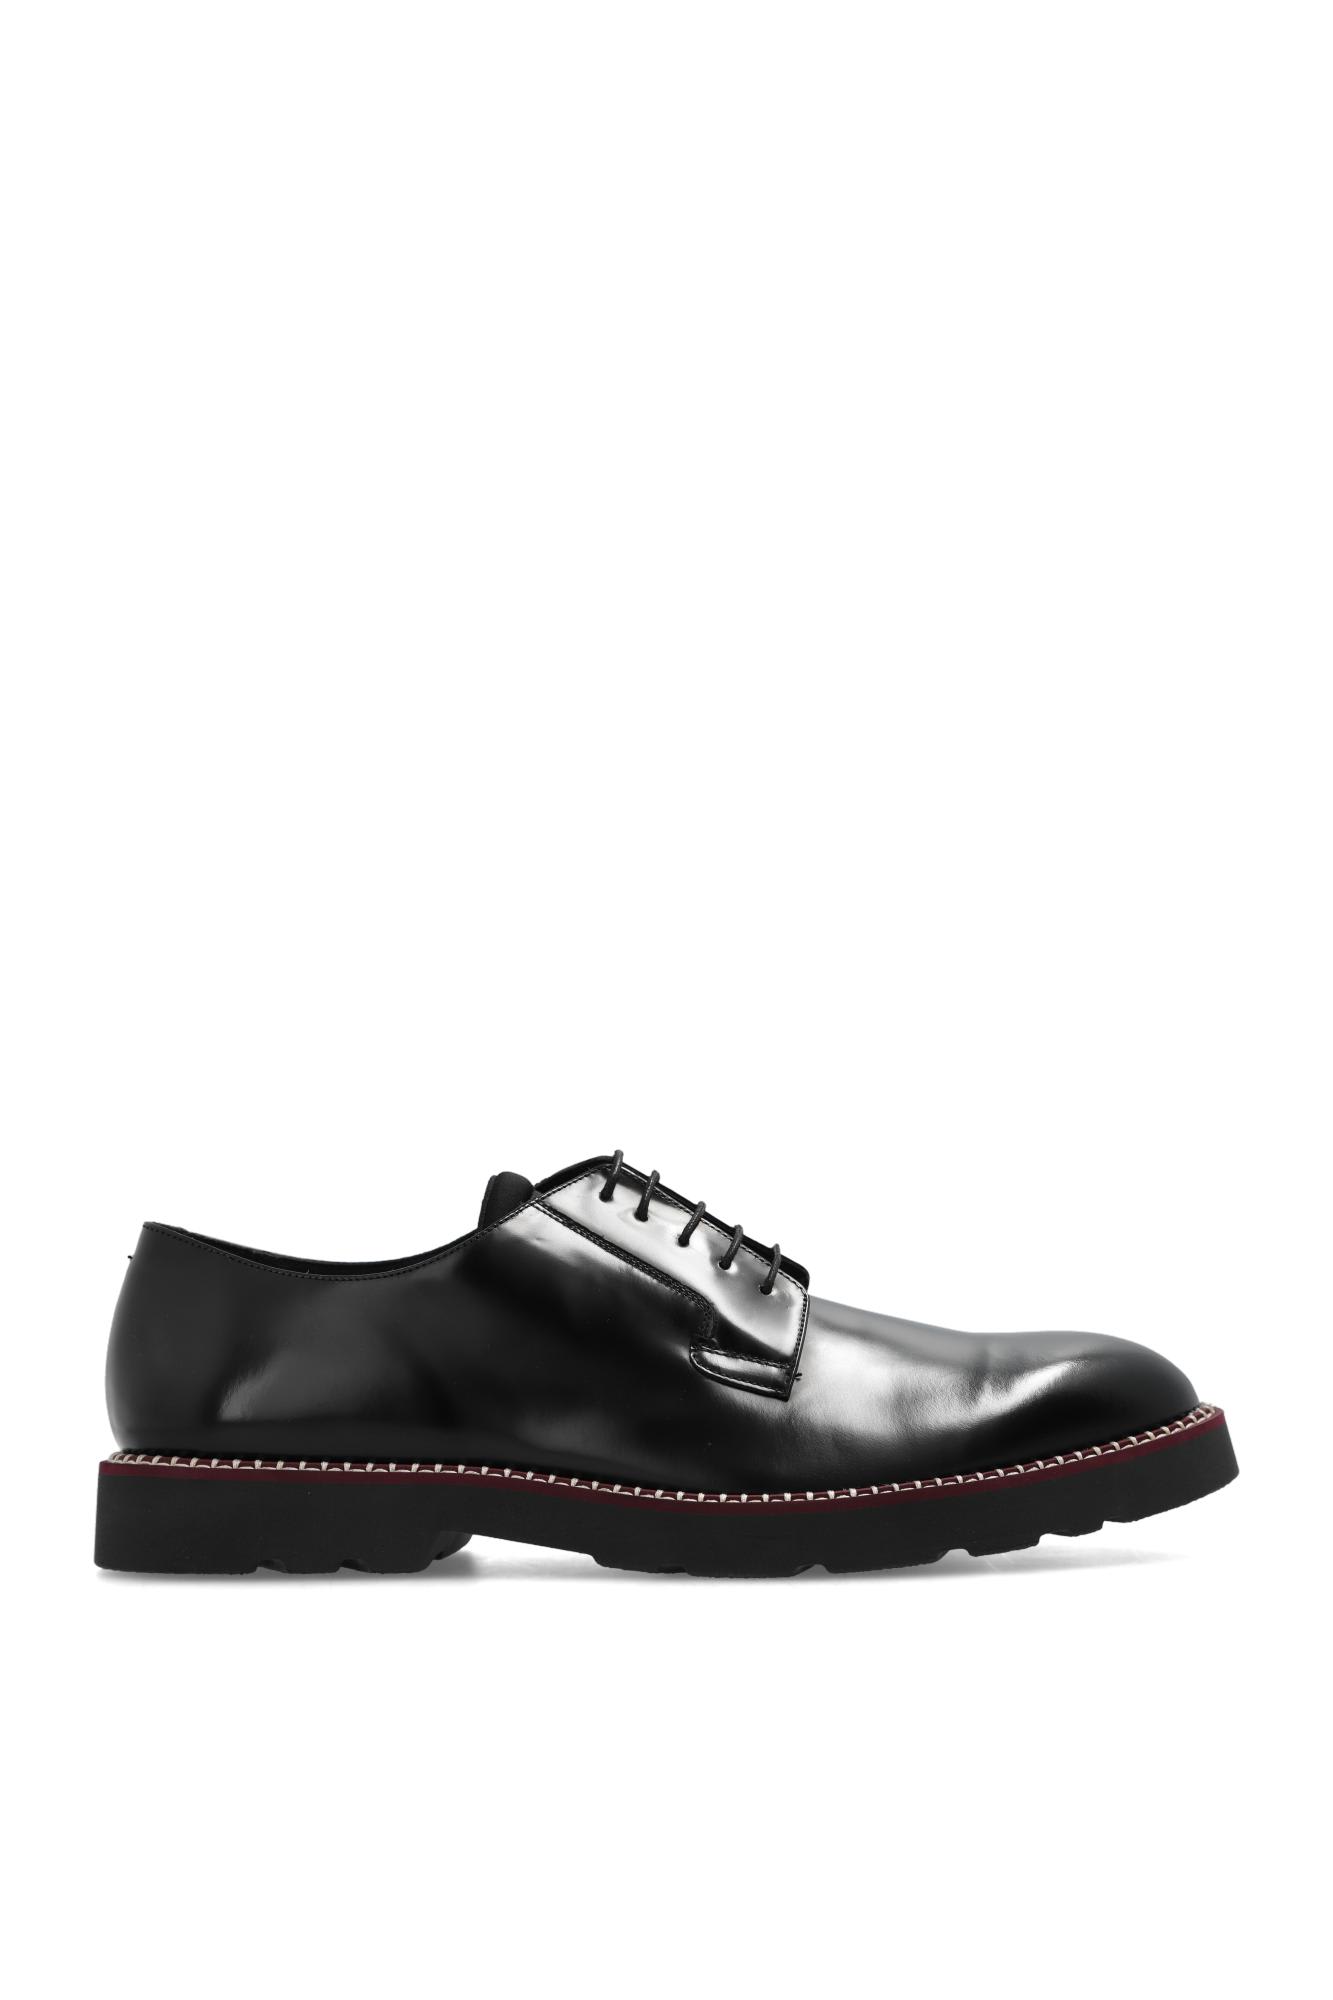 Paul Smith Ras Leather Shoes In Black